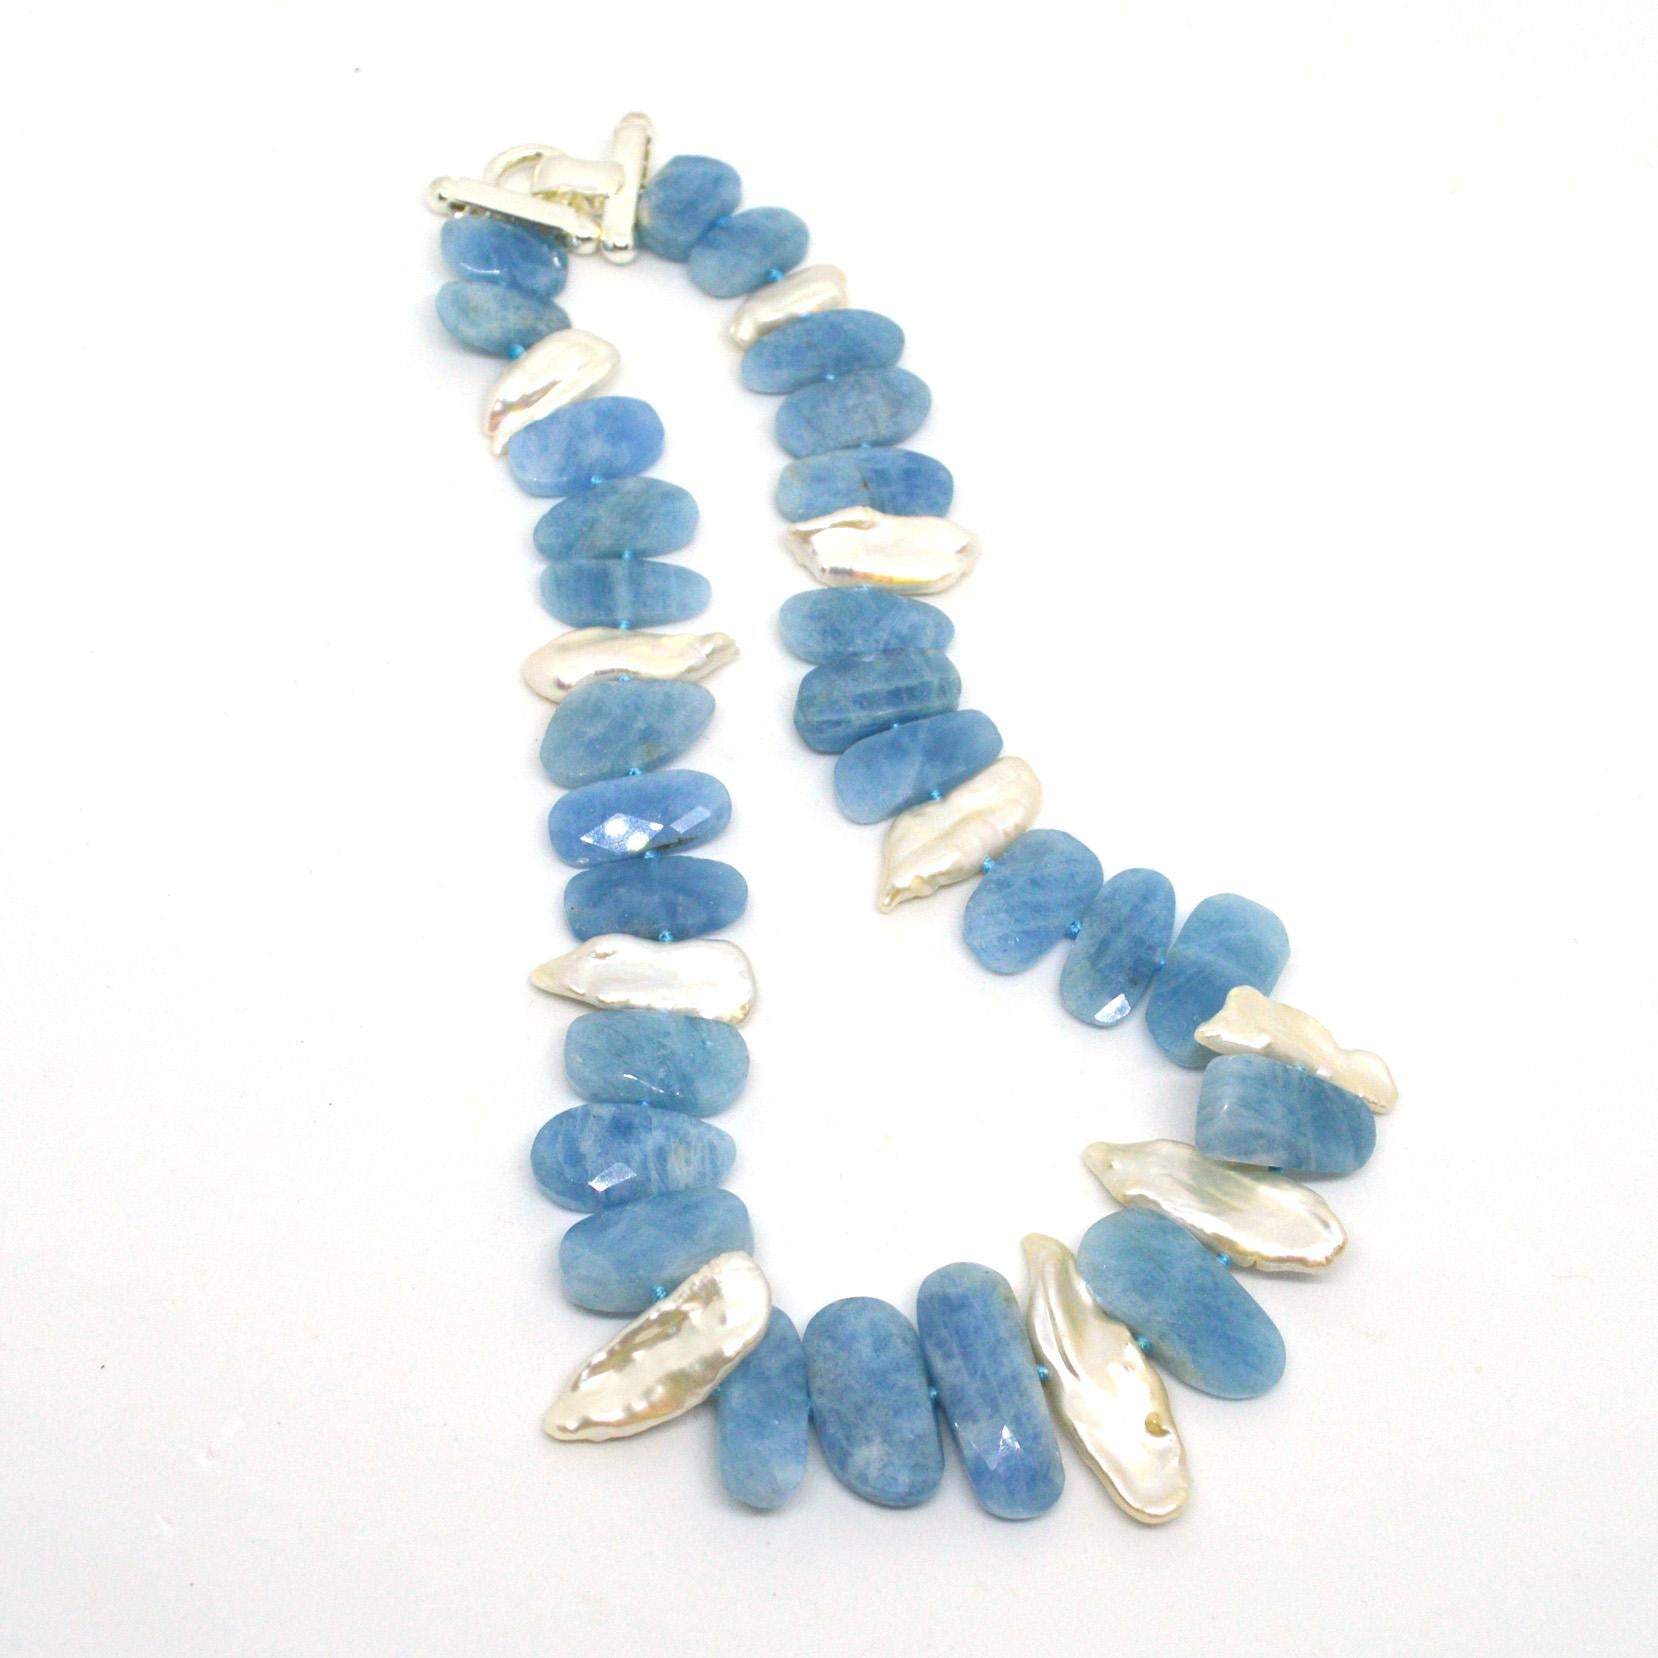 Aquamarine flat faceted centre drilled nuggets approximately 20mm wide with centre drilled keshi freshwater pearls. Hand knotted on matching aqua thread with a sterling silver clasp.
Finished necklace measures 46cm 